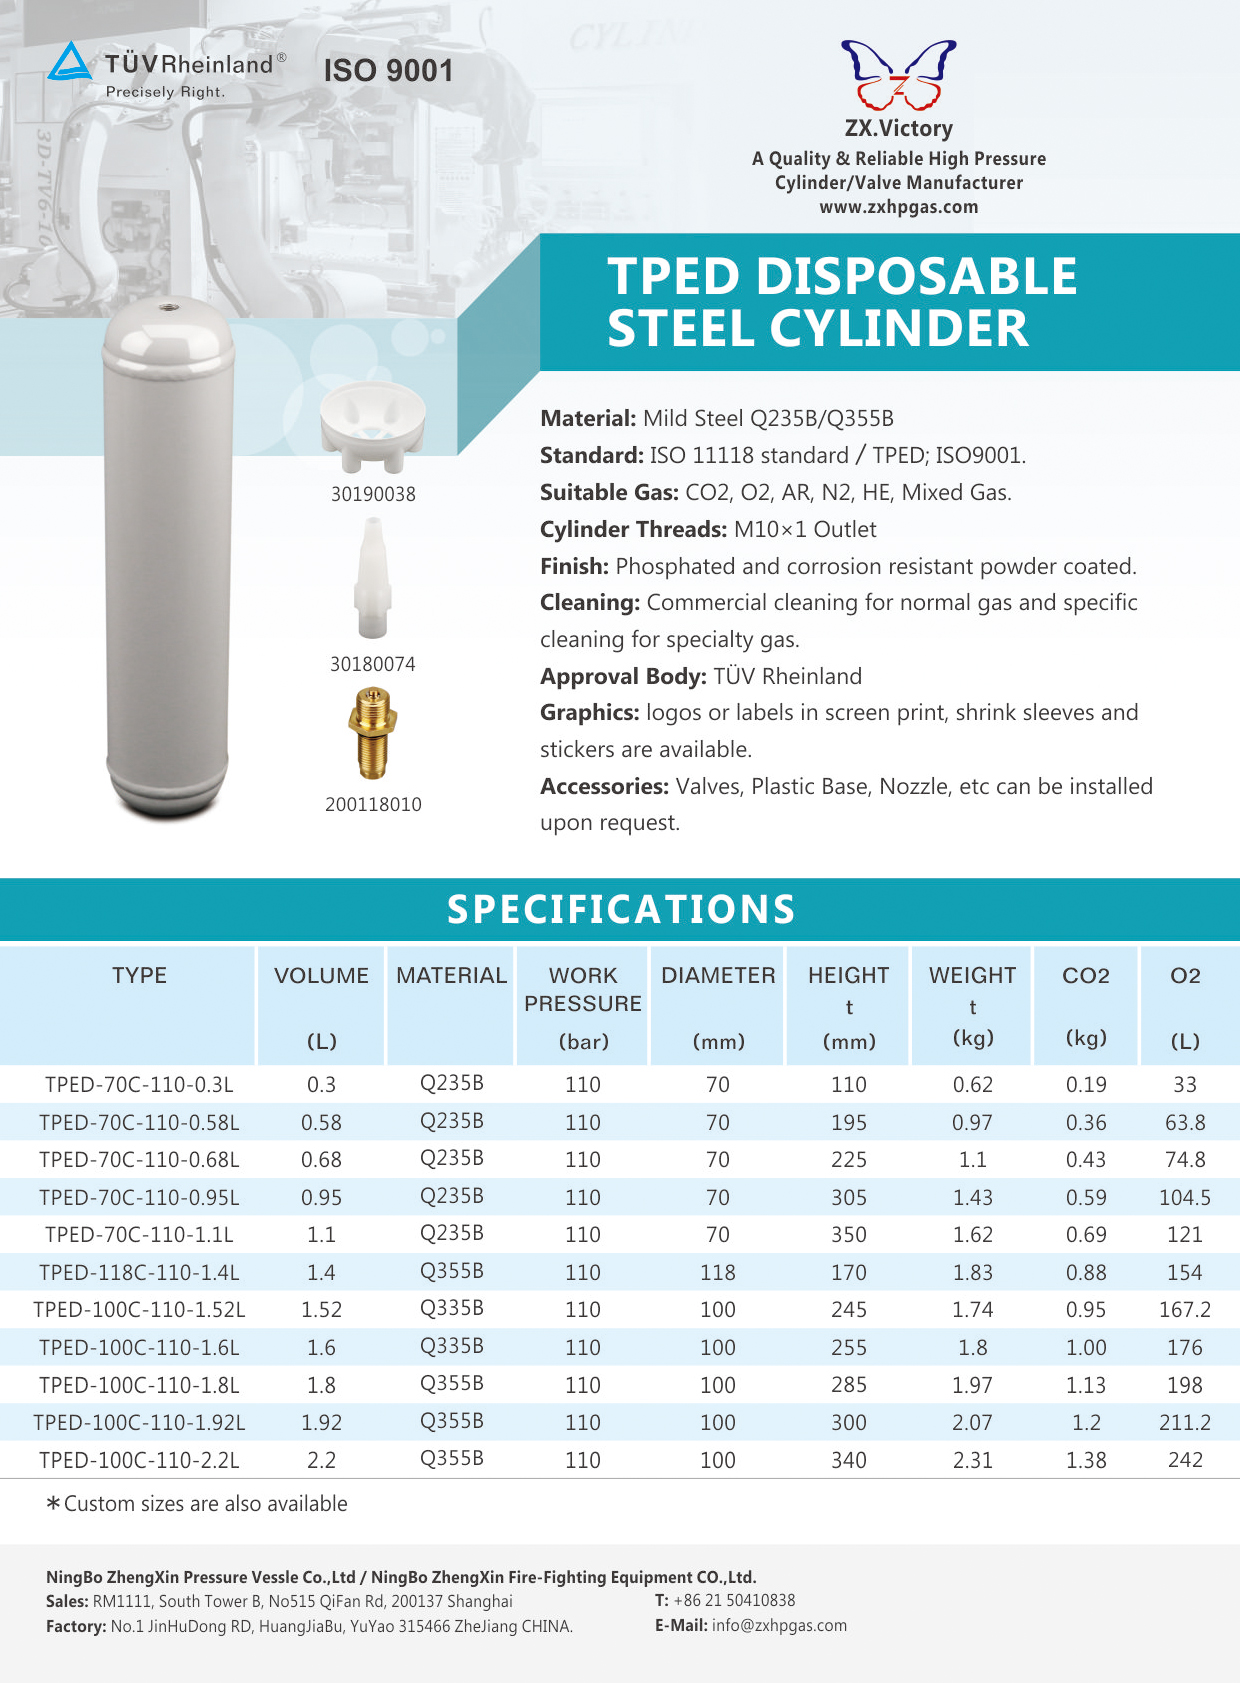 TPED Disposable Cylinder